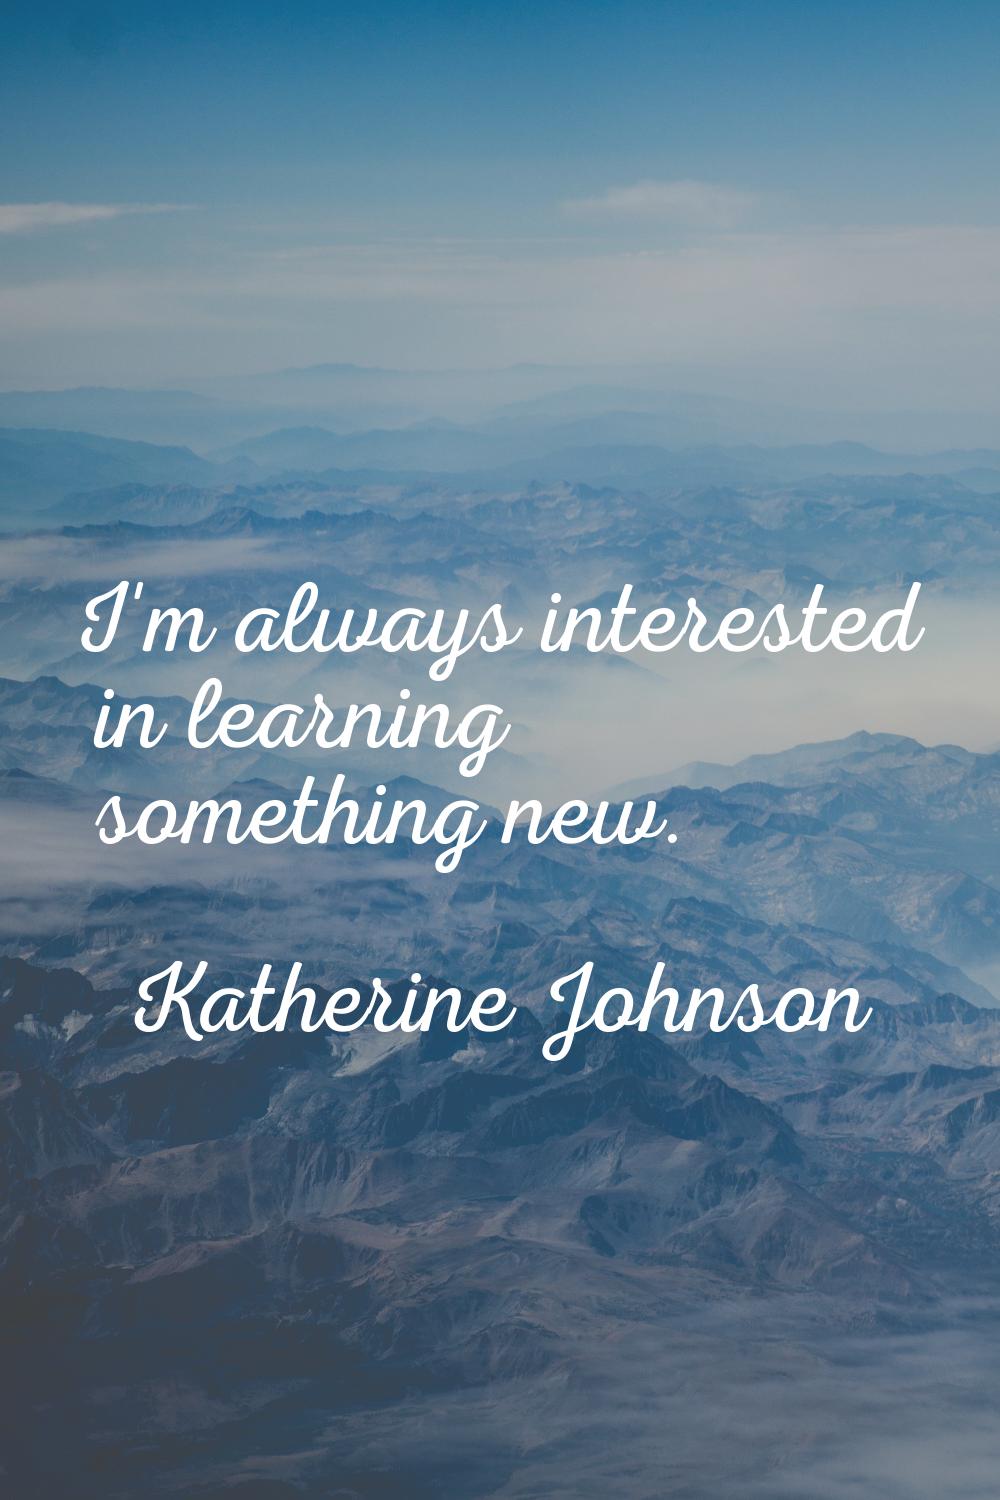 I'm always interested in learning something new.